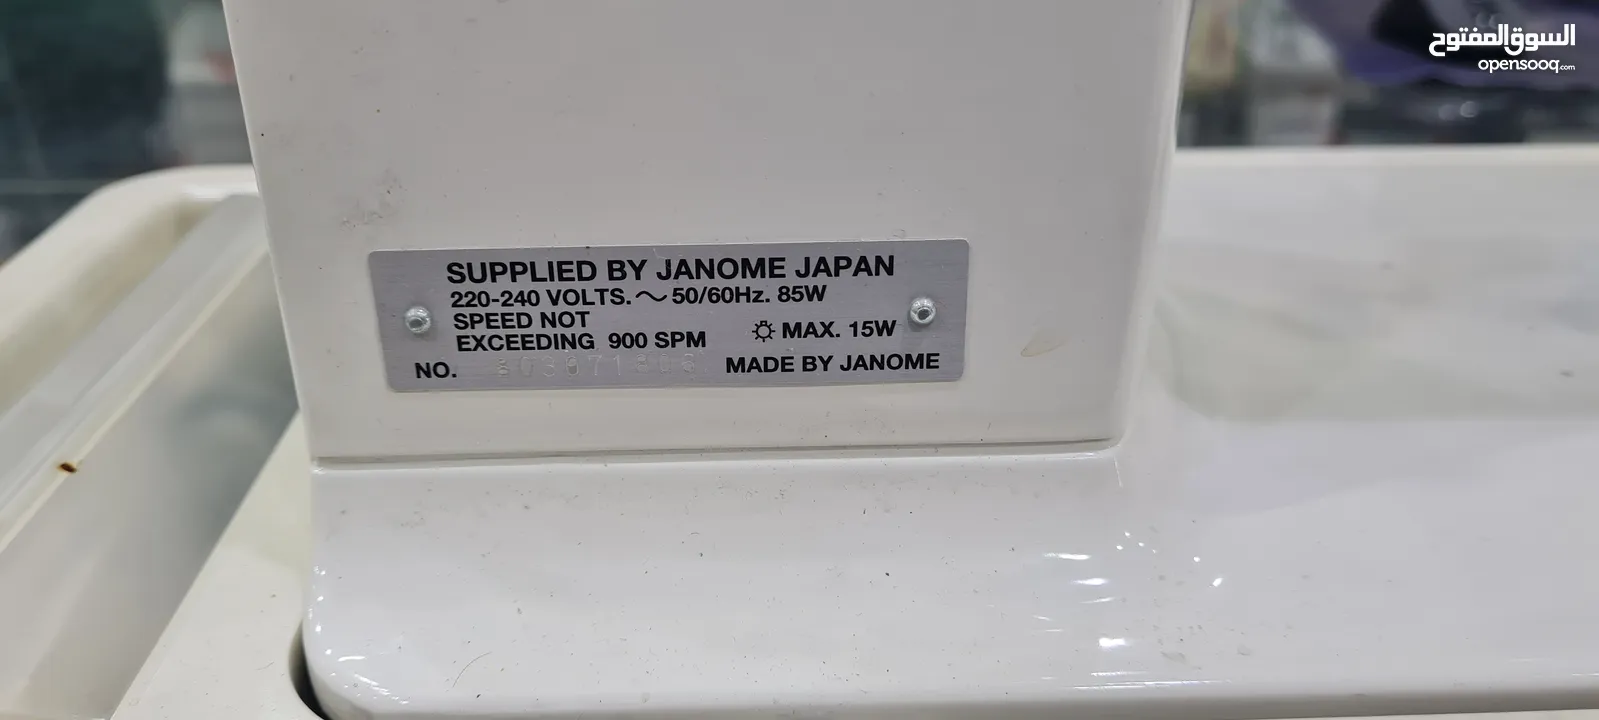 Janome 808A Sewing Machine, Made by Janome Japan.